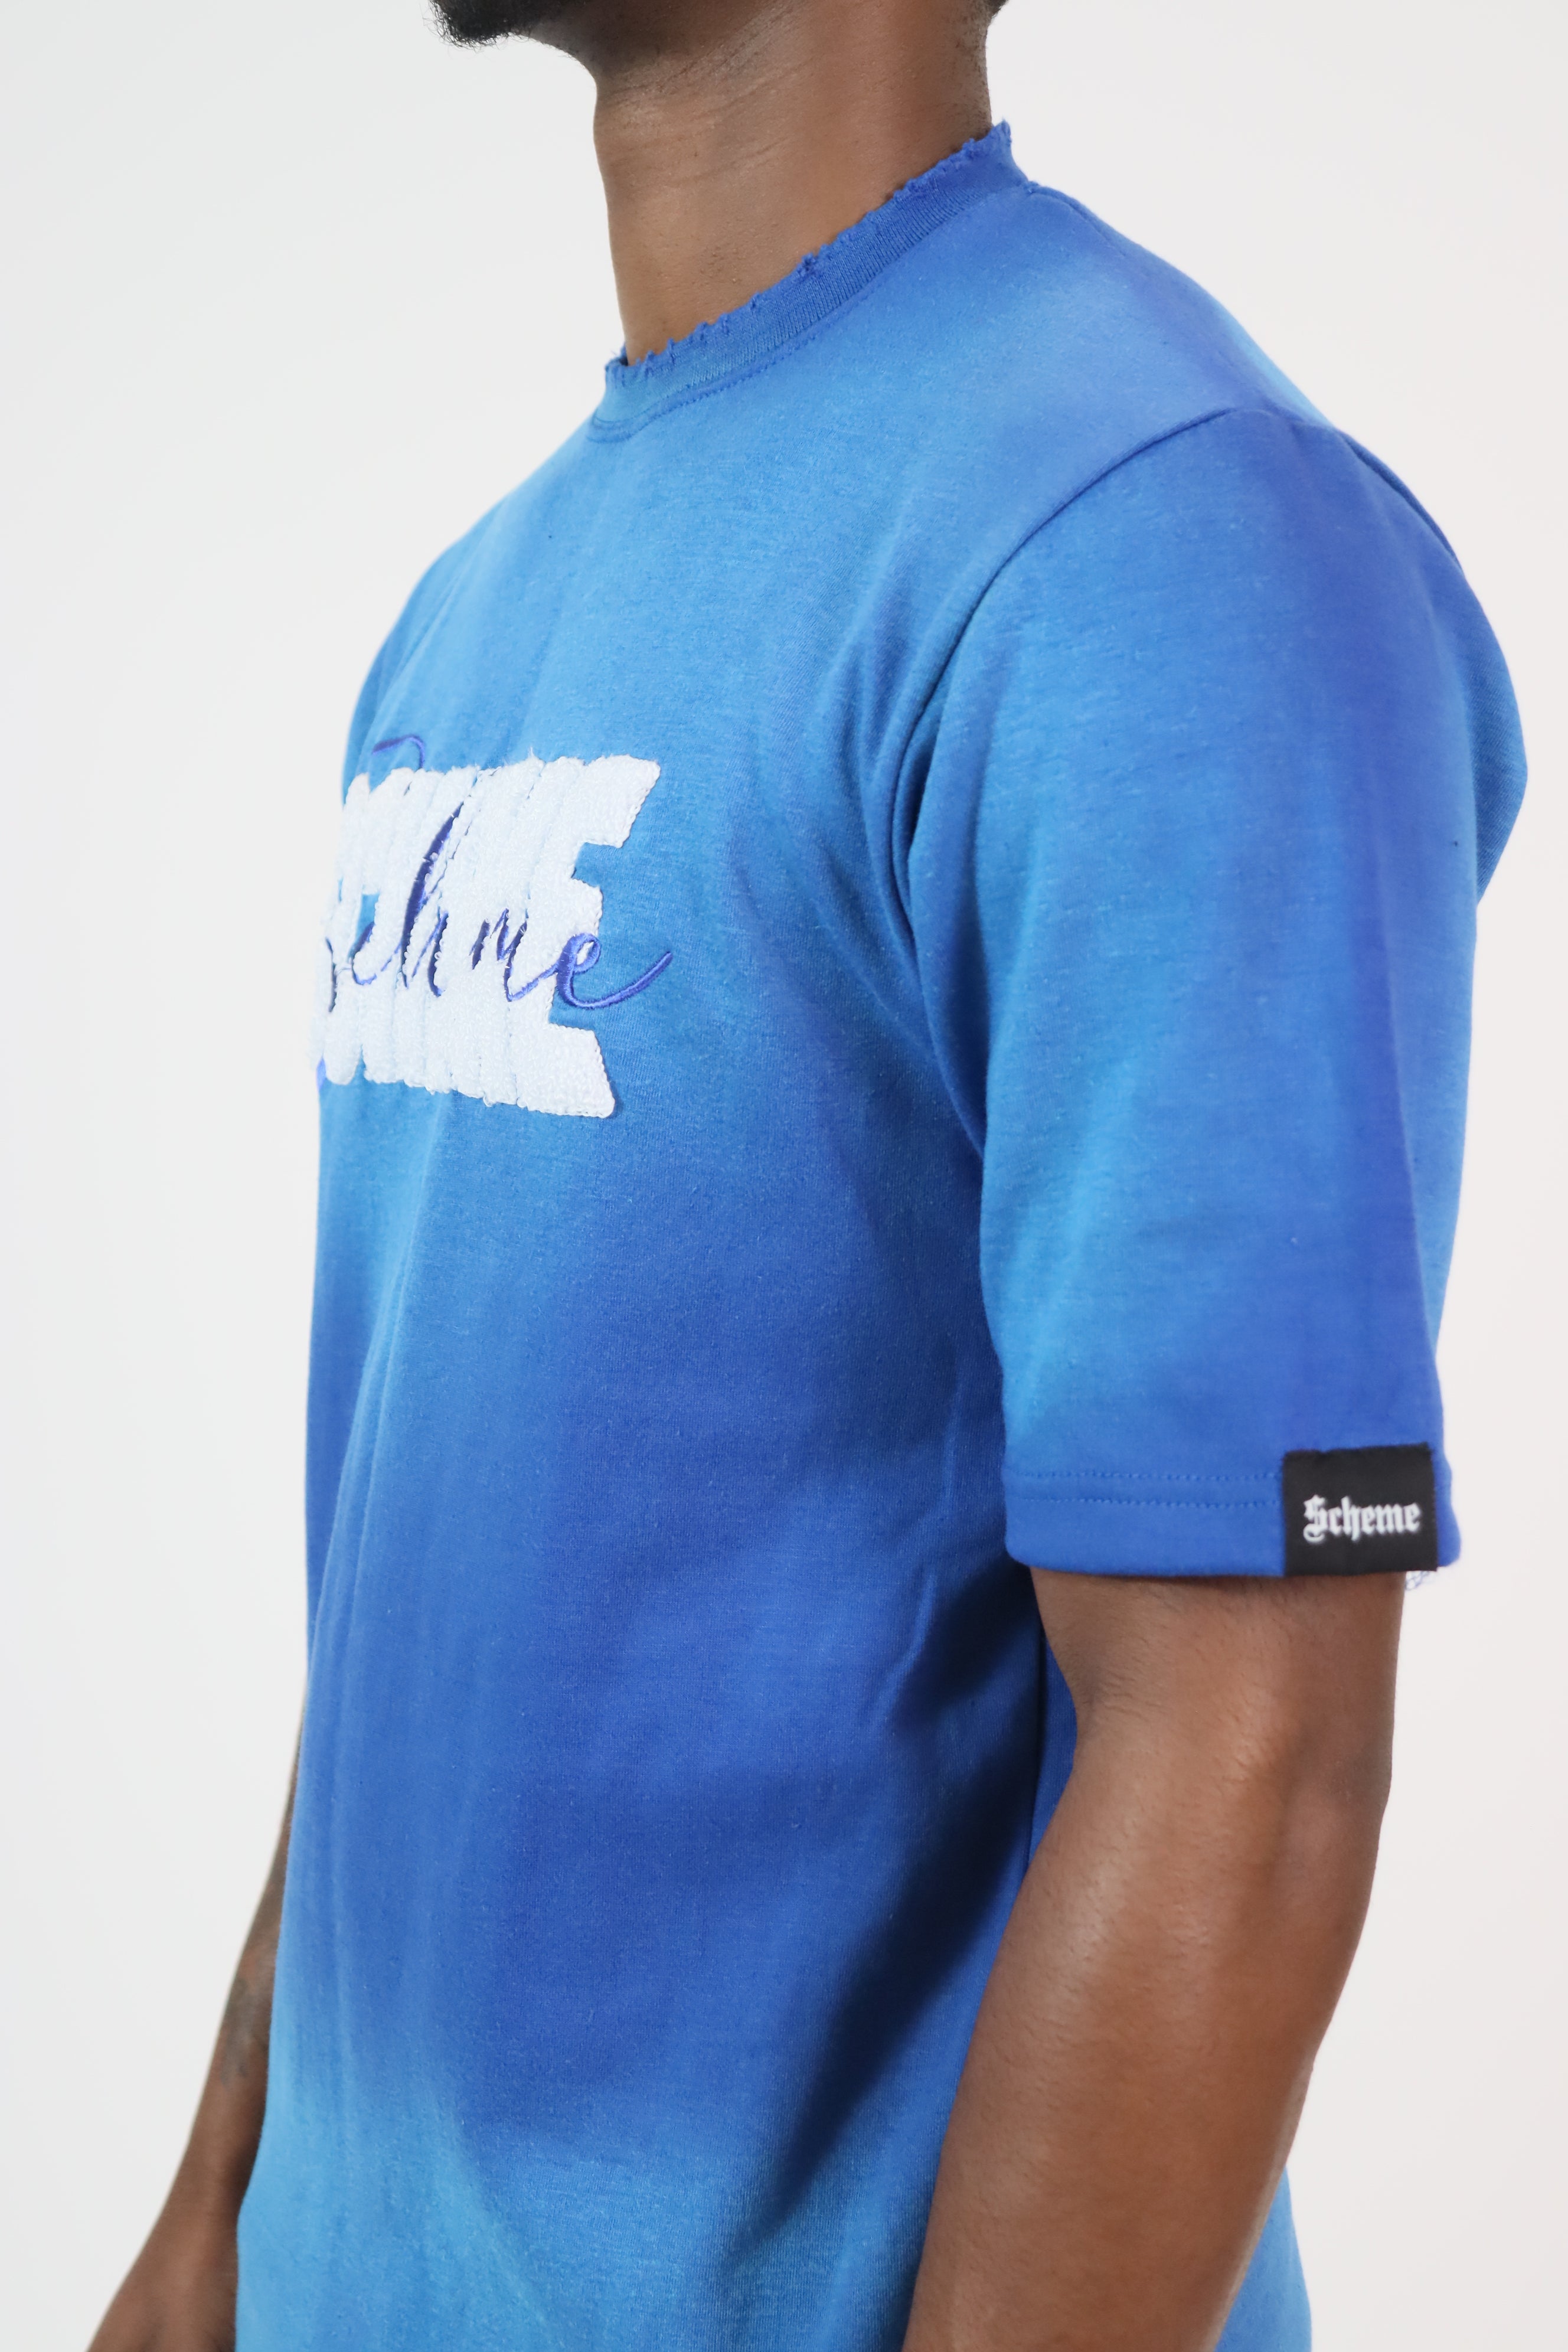 "Scheme" Distressed Chenille Tee - Washed Blue